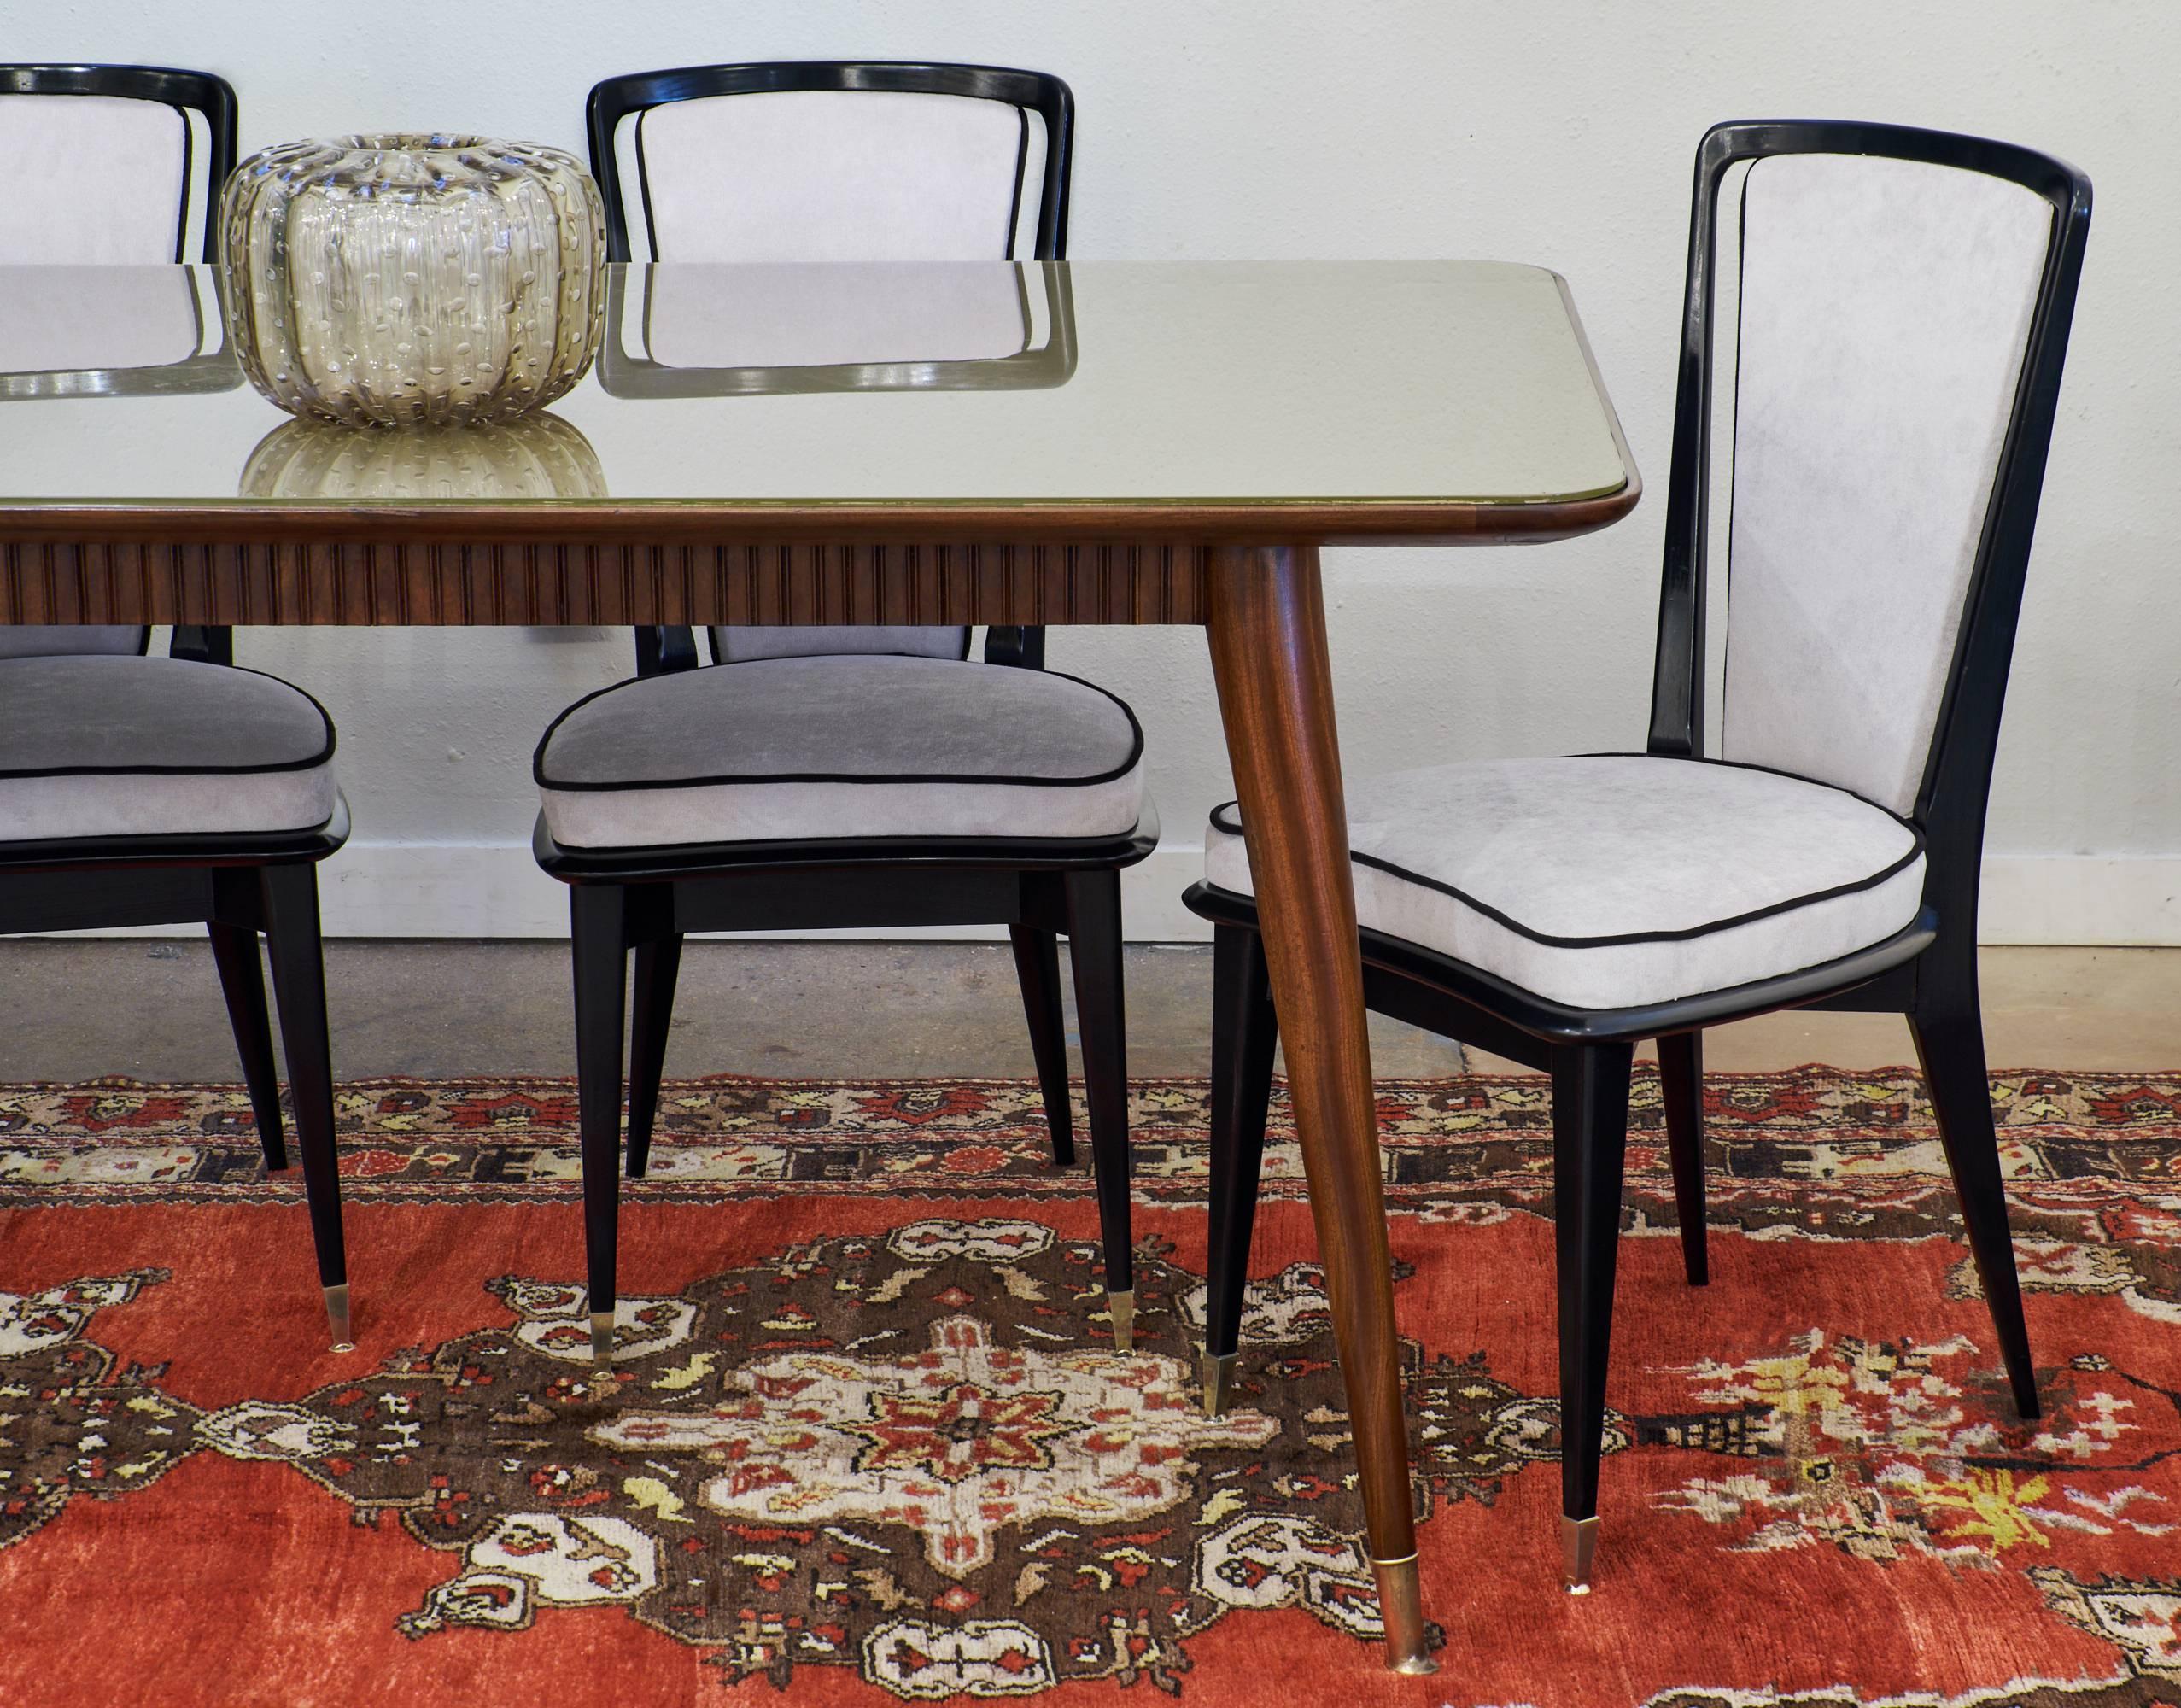 Set of six Mid-Century Modern dining chairs with ebonized and French polished cherrywood and brass feet. These sleek chairs feature curved seats, newly upholstered grey velvet and black velvet cording.